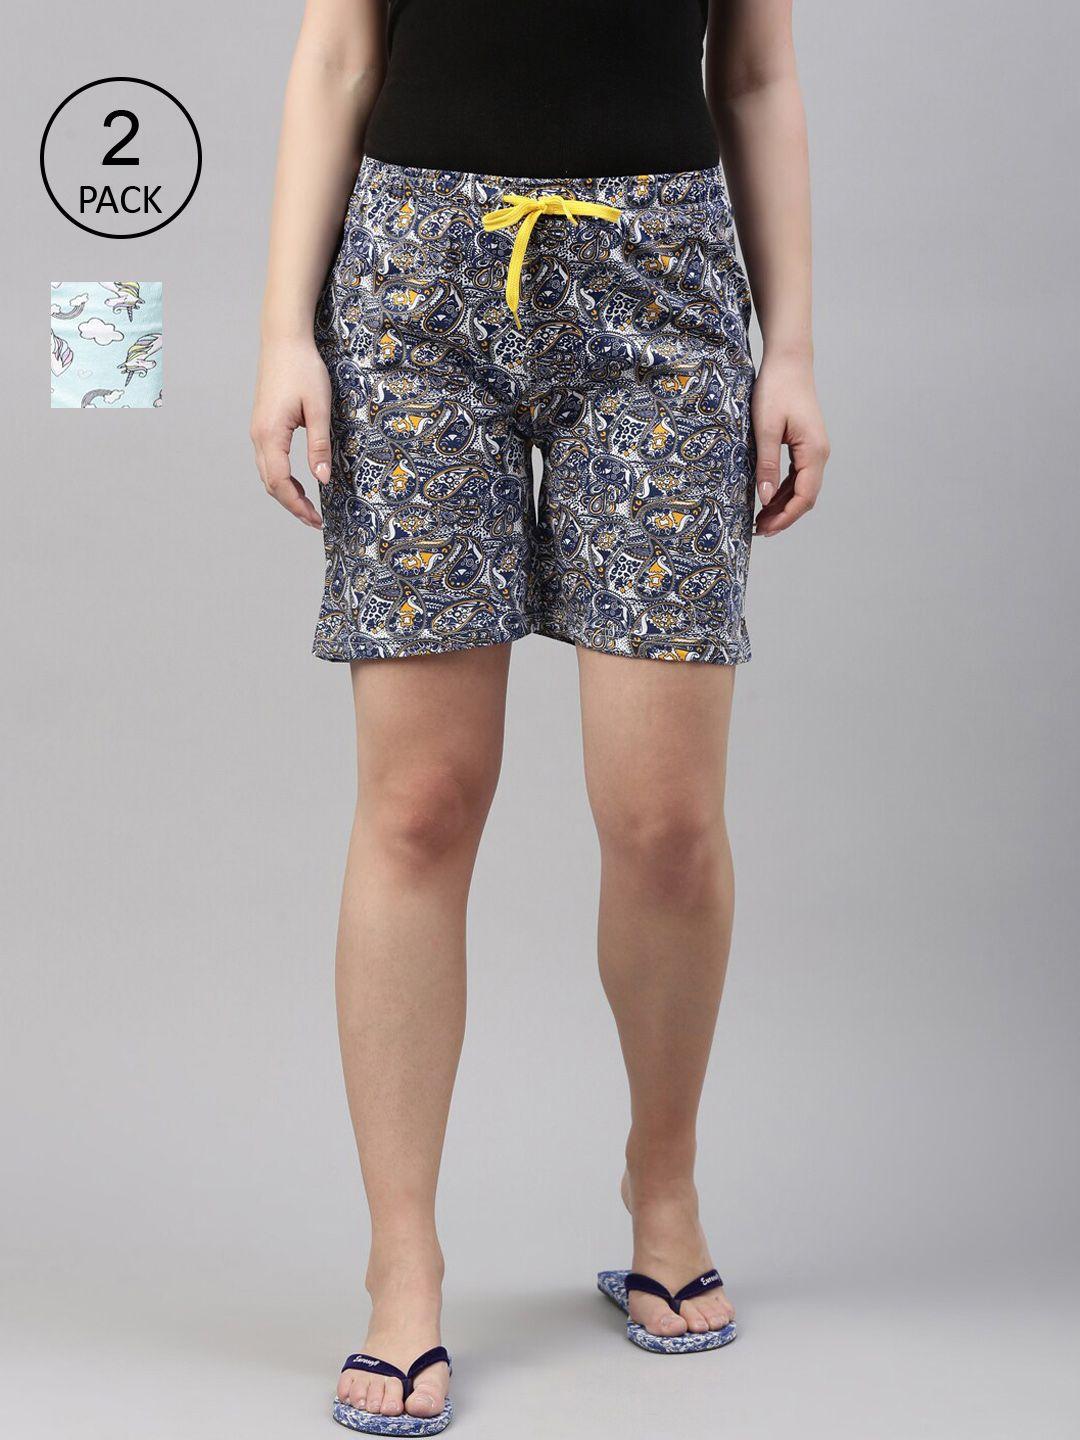 kryptic pack of 2 women blue conversational printed cotton shorts